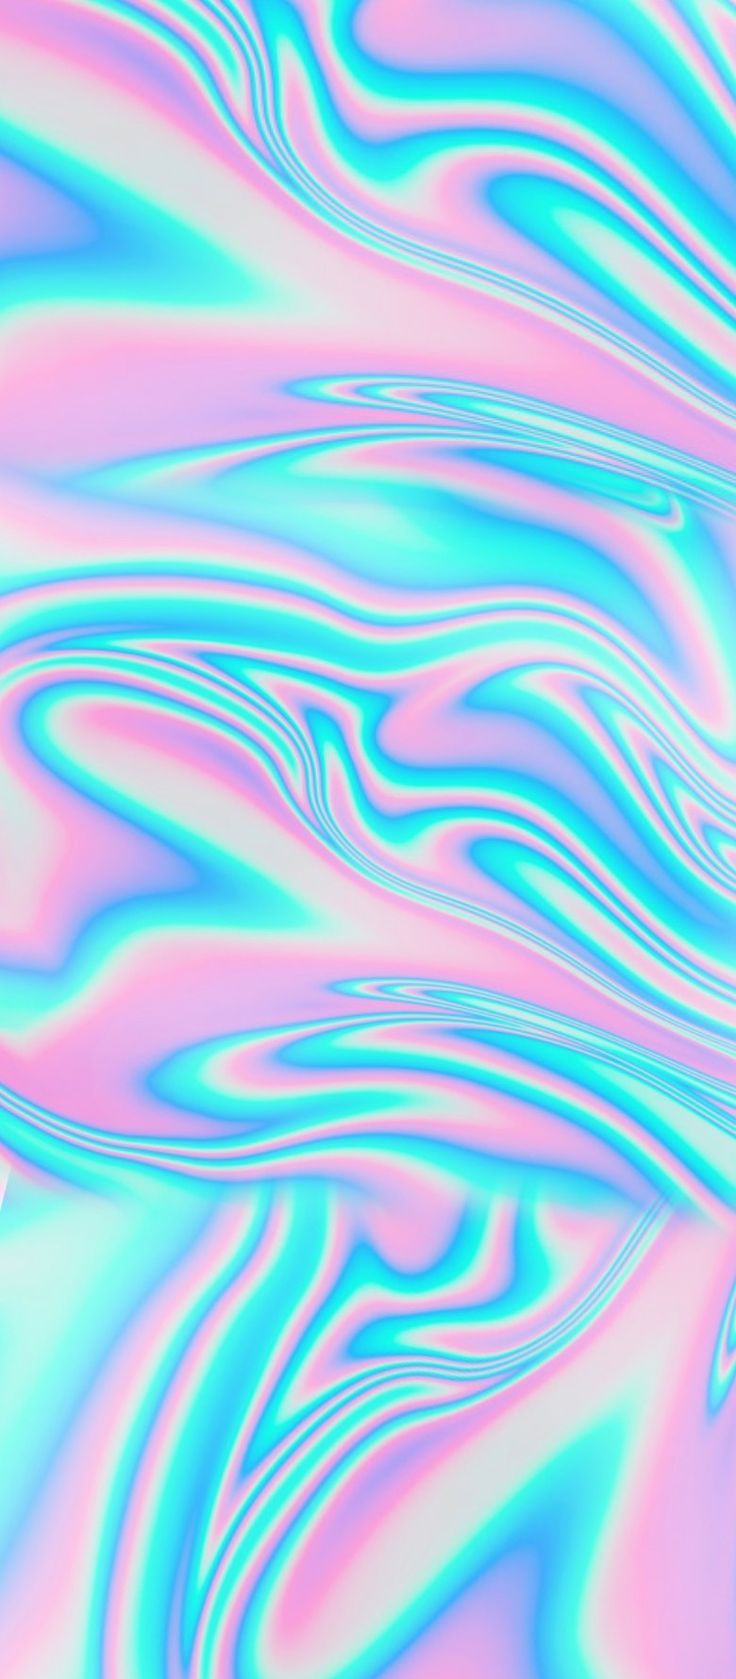 Holographic. Holographic wallpaper, Holo wallpaper, Holographic background